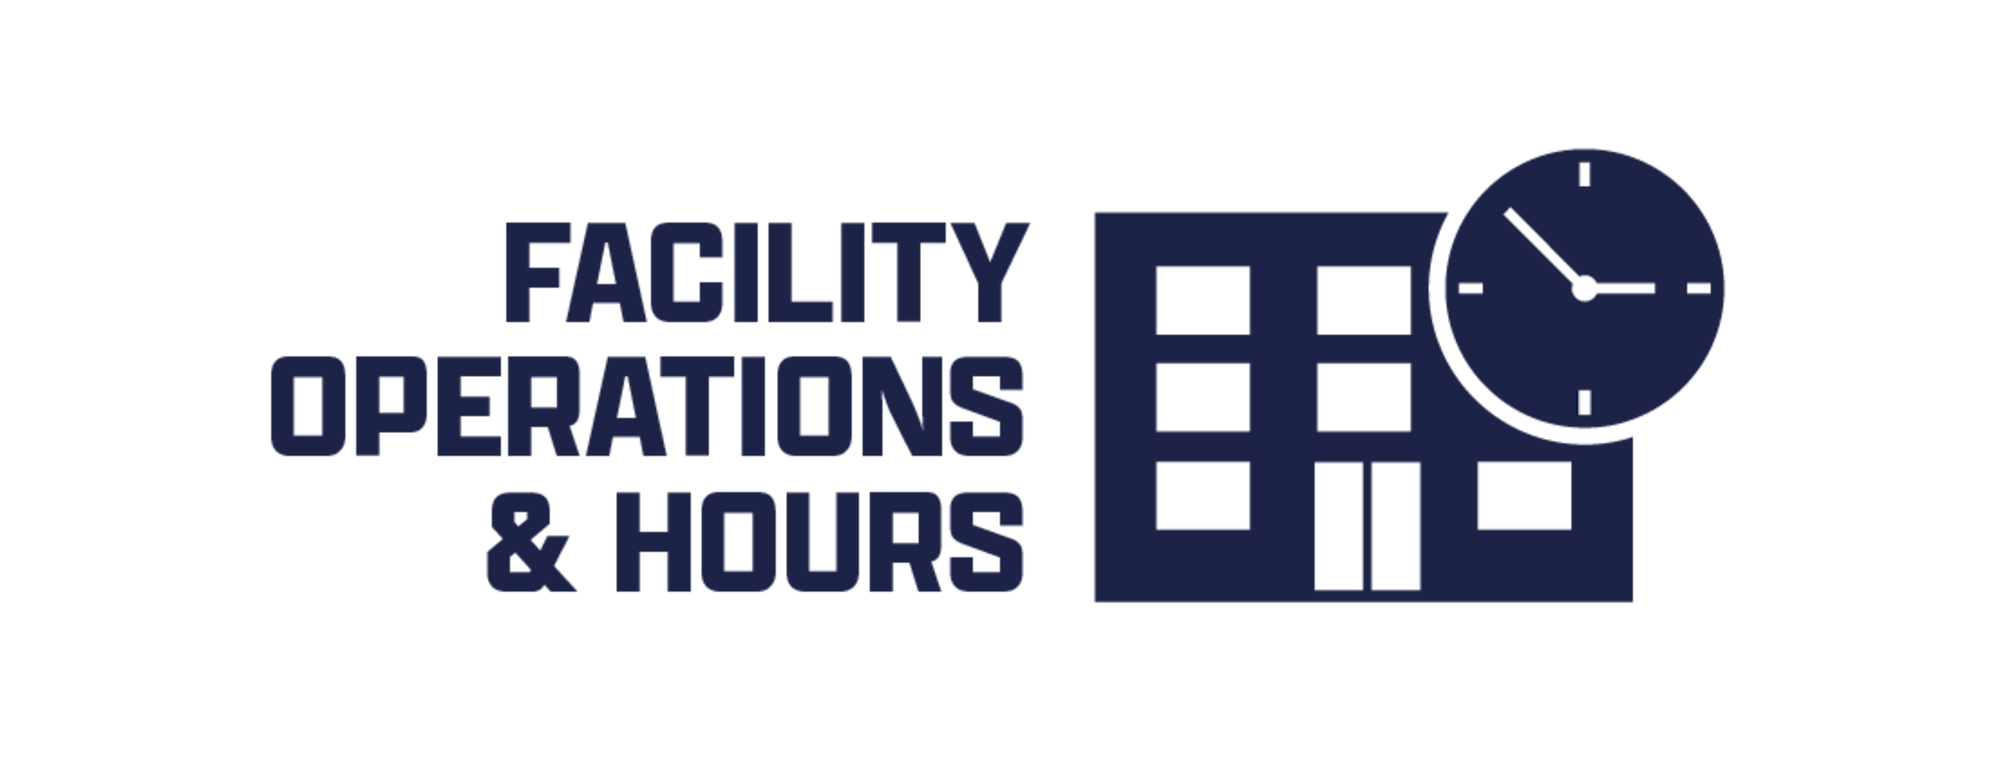 Facility Operations & Hours graphic